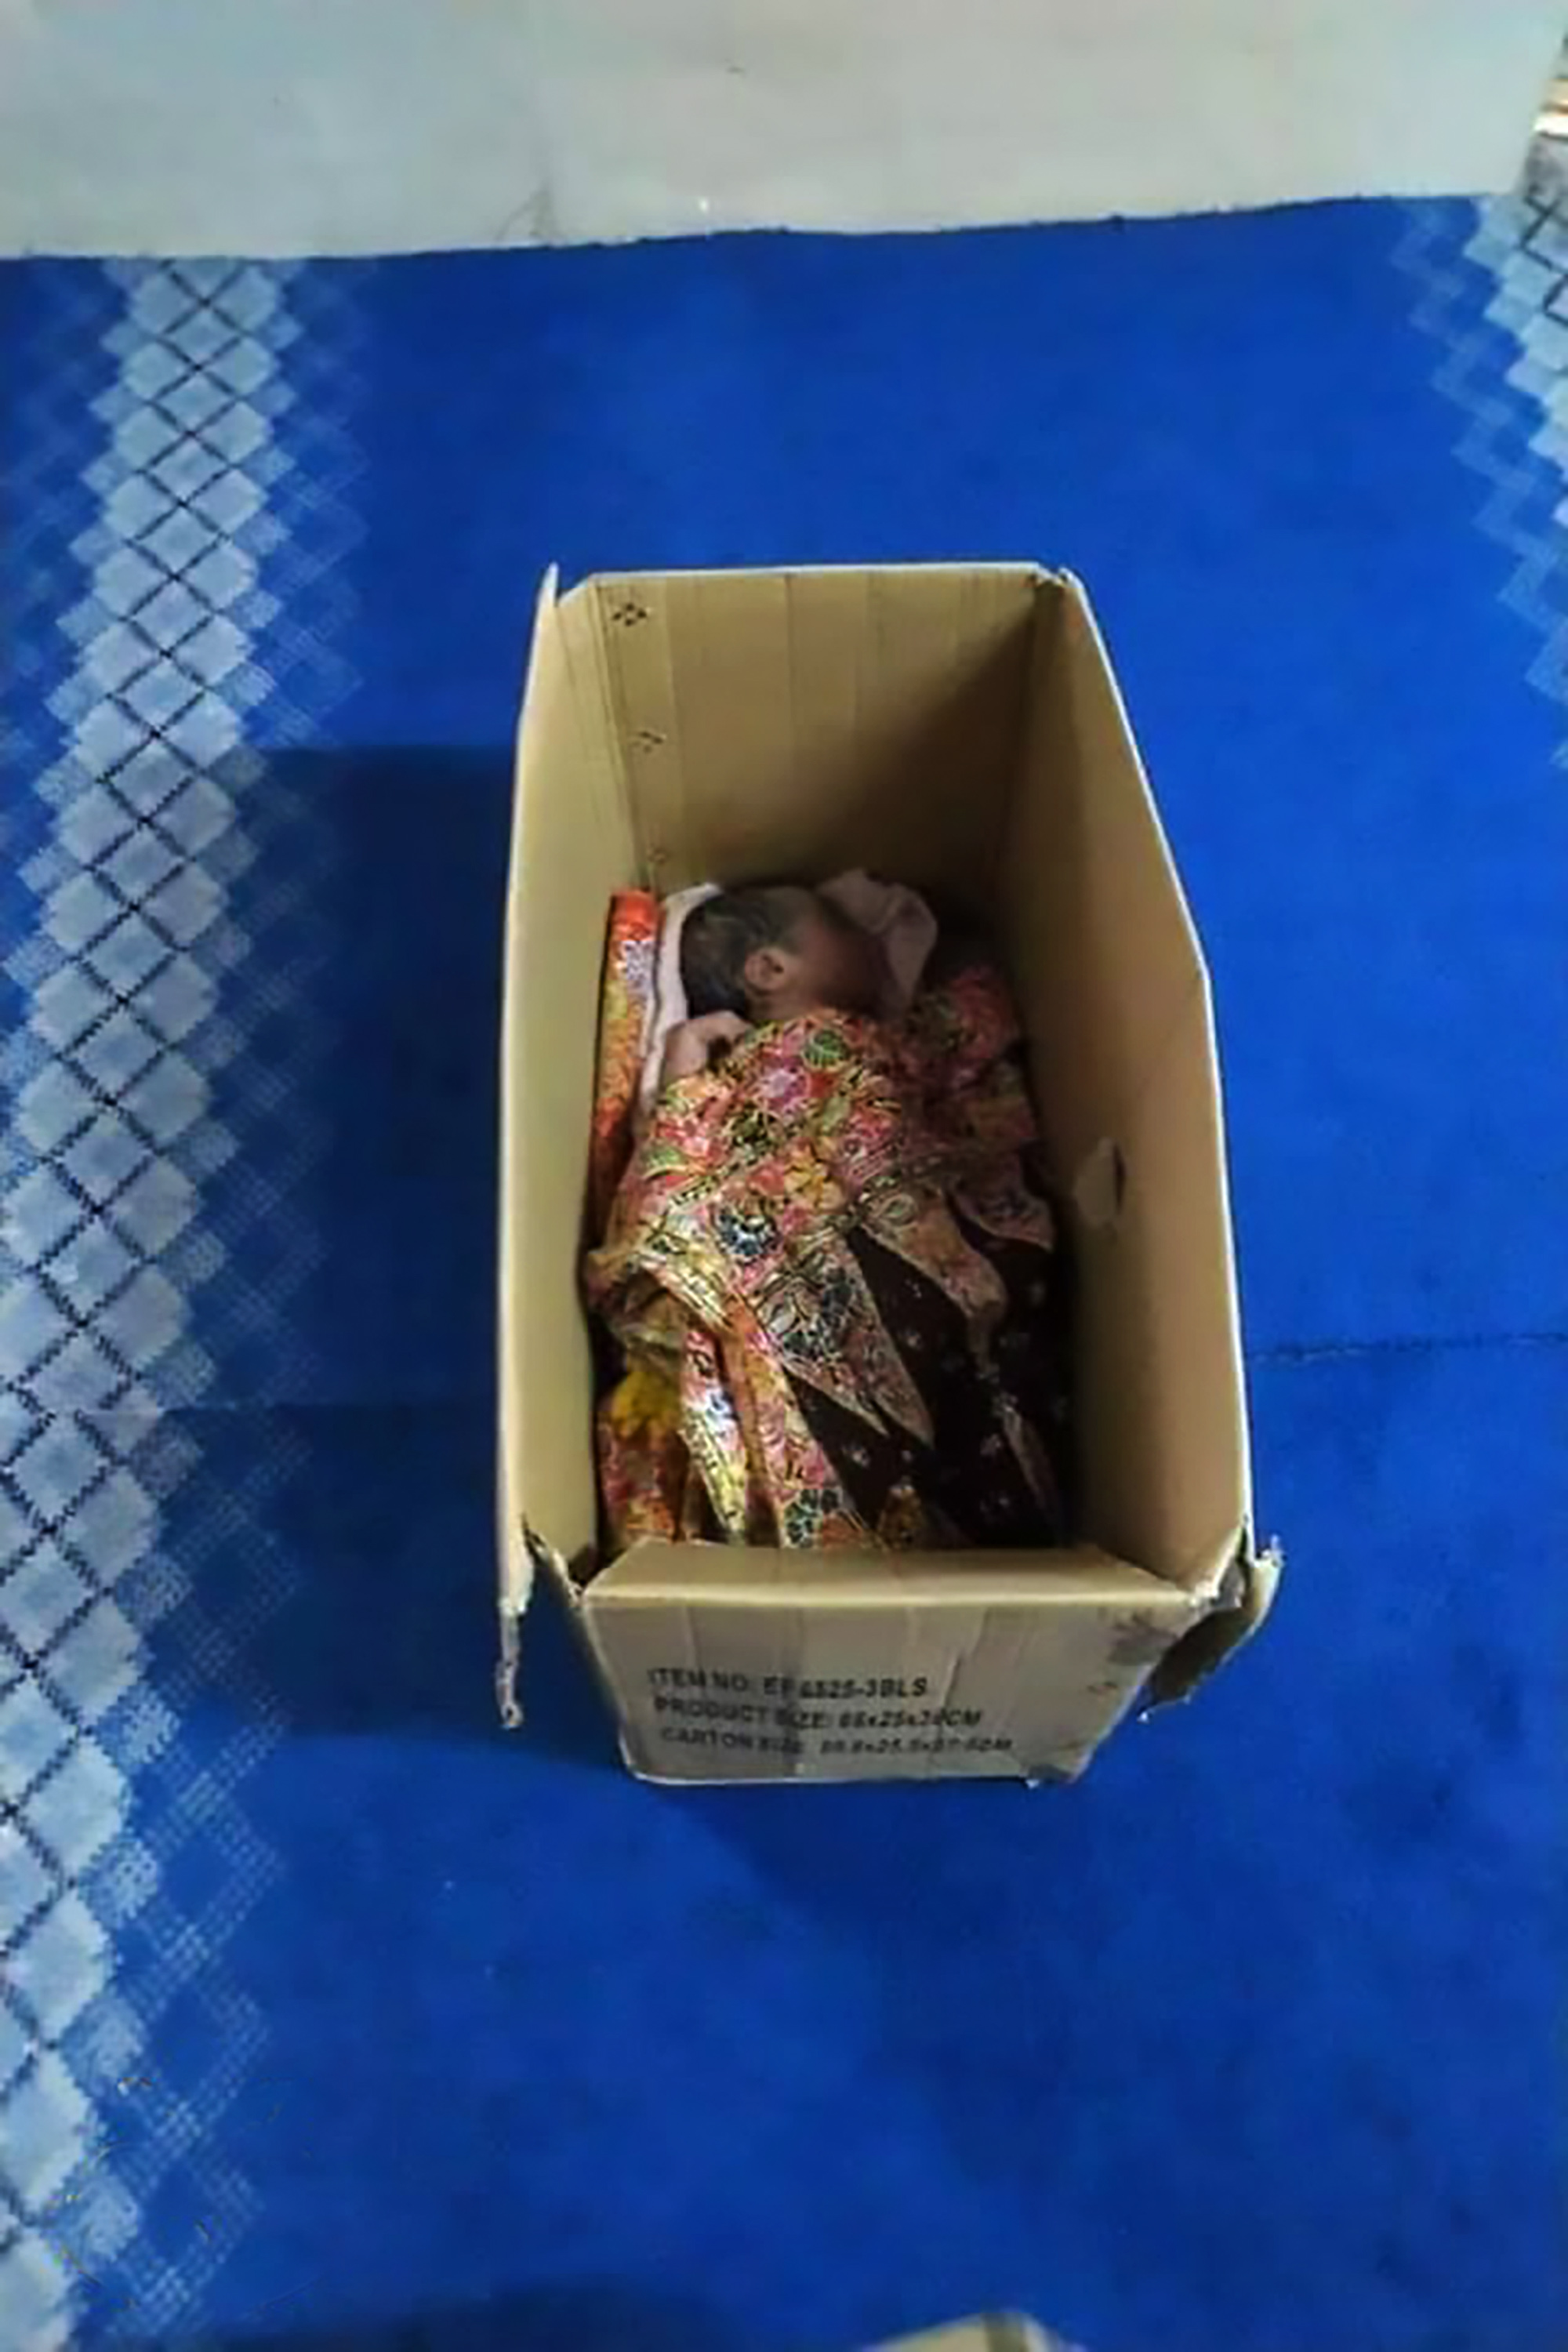 Read more about the article Adorable Newborn Baby Dumped In Box Outside Mosque